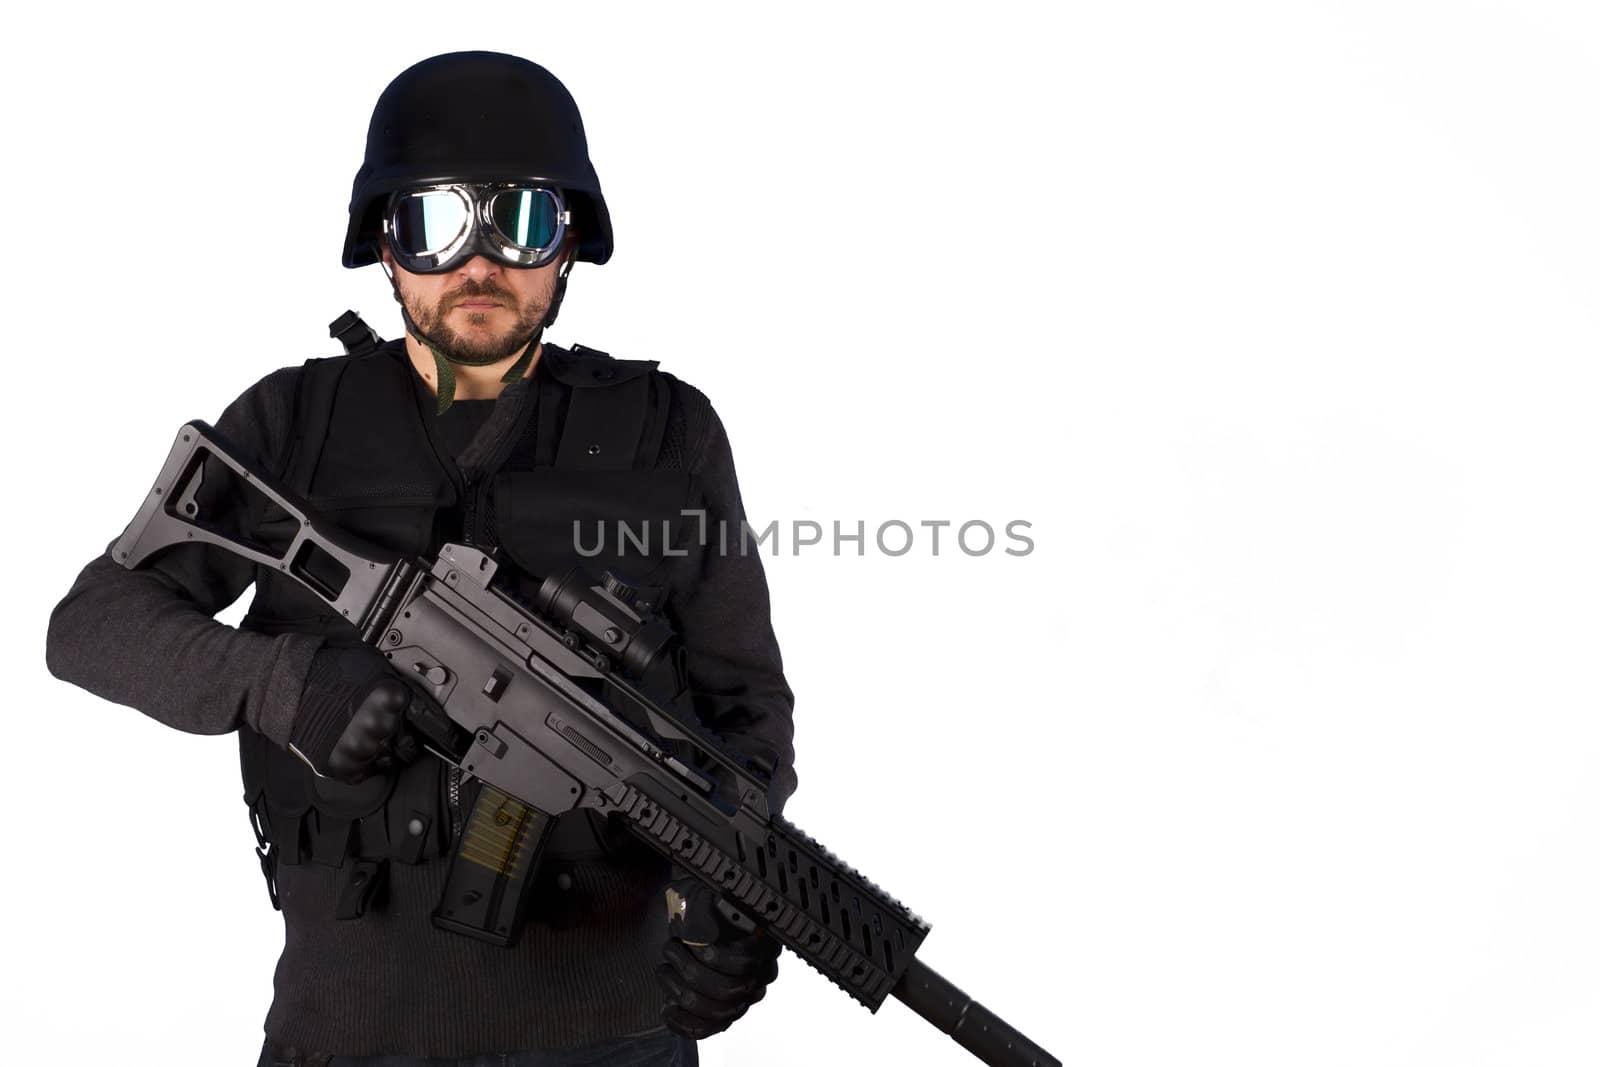 Defense against terrorism,Armed policeman isolated on white by FernandoCortes